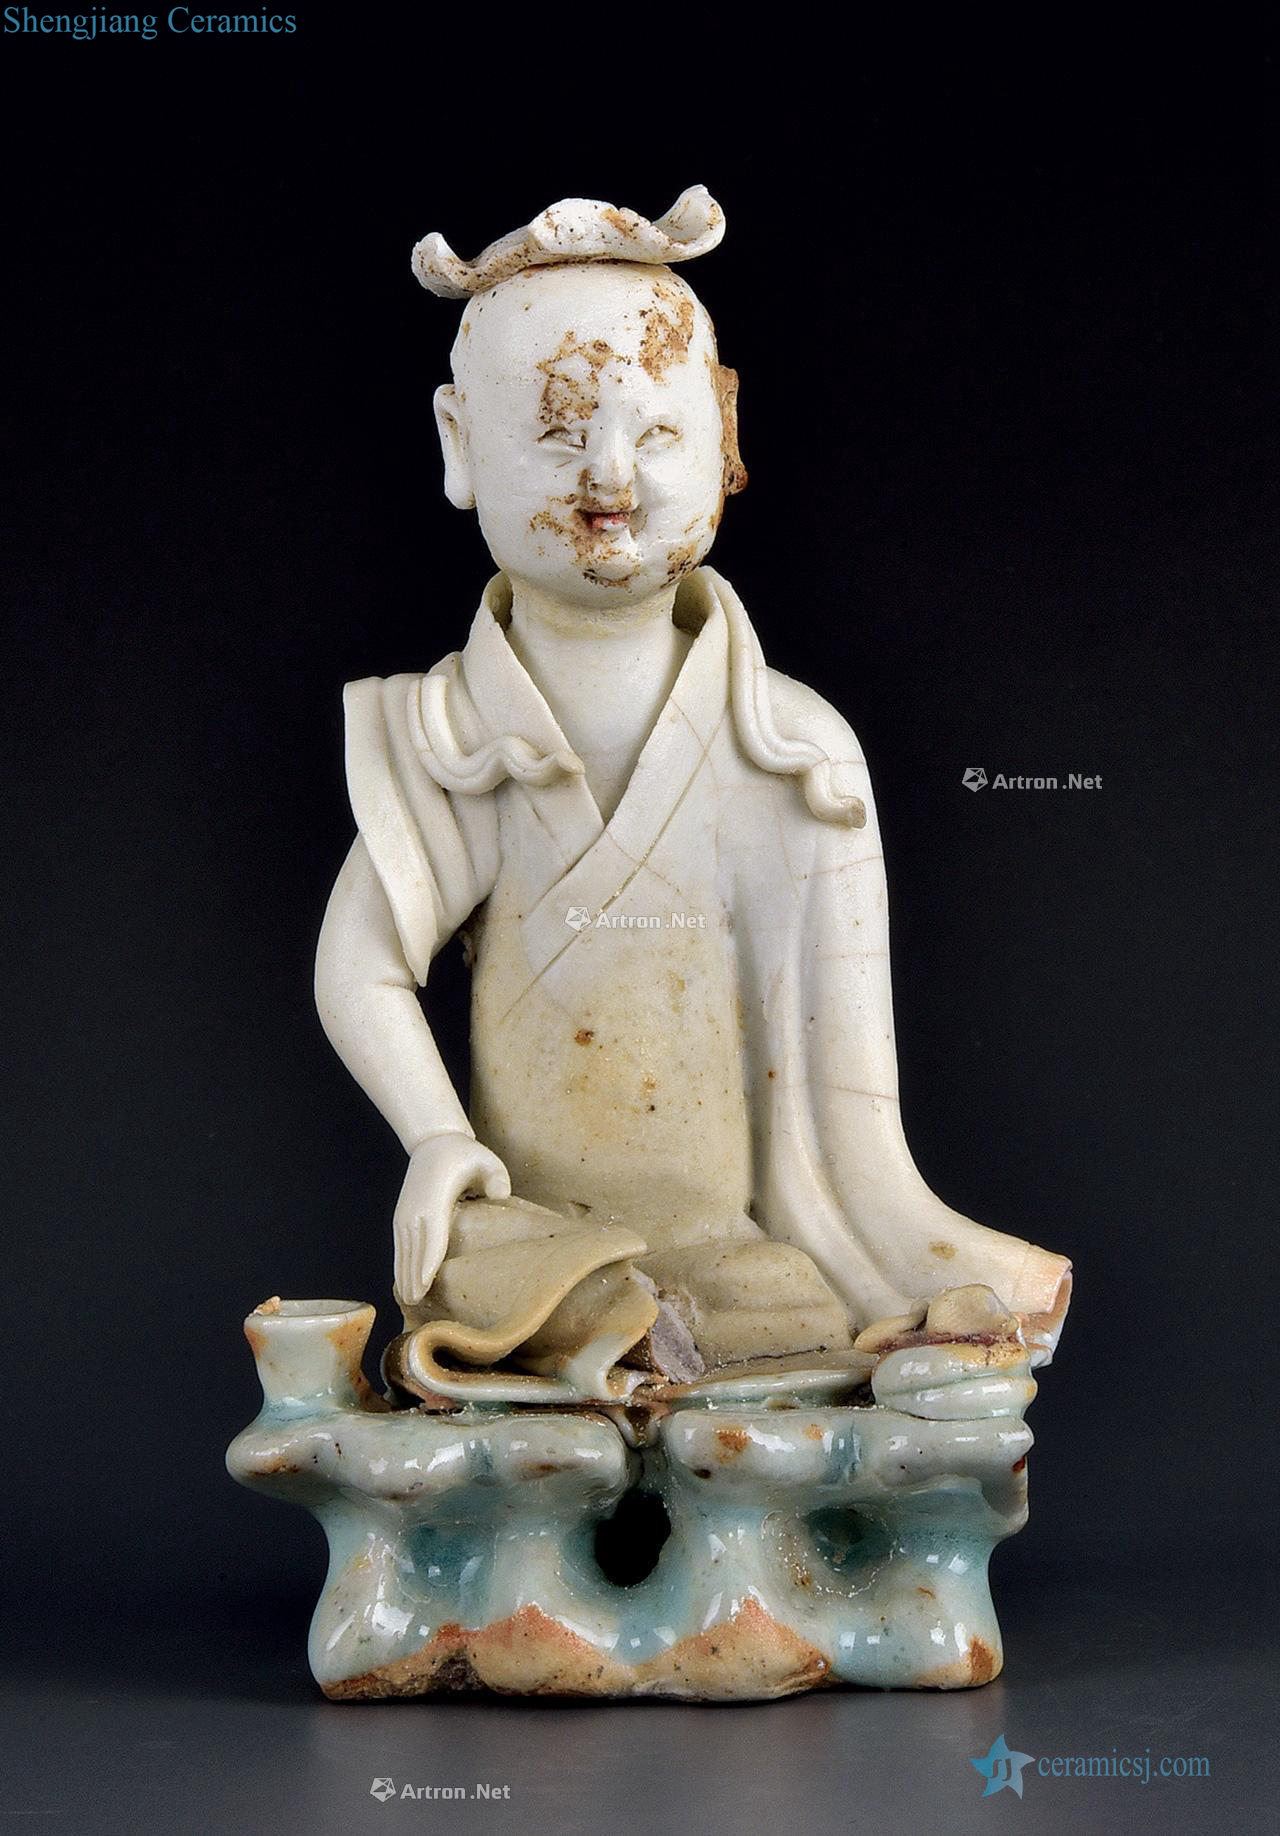 The southern song dynasty Left kiln green craft the lad statue